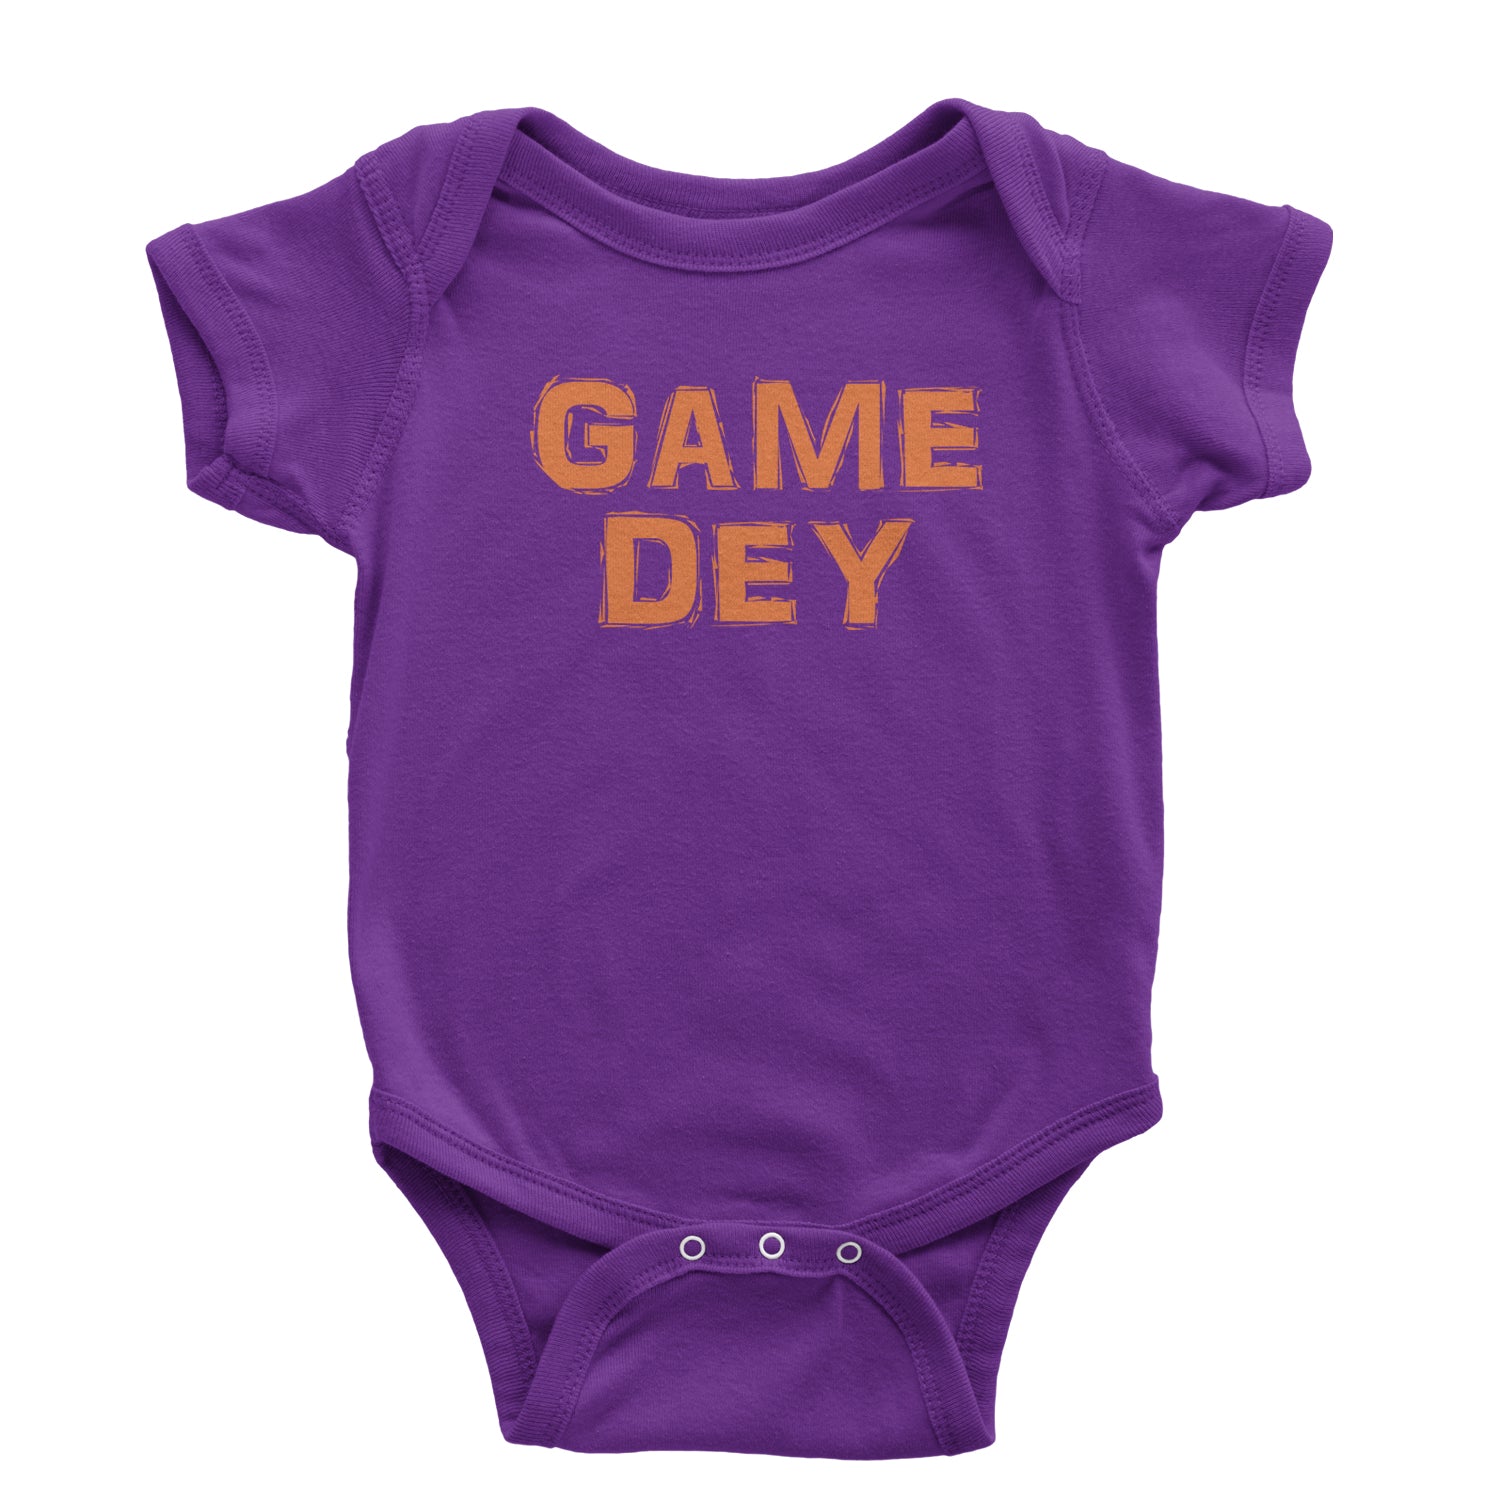 Game Dey Cincinnati Football Infant One-Piece Romper Bodysuit and Toddler T-shirt ball, burrow, cincinati, cleveland, foot, football, joe, nati, ohio, who by Expression Tees